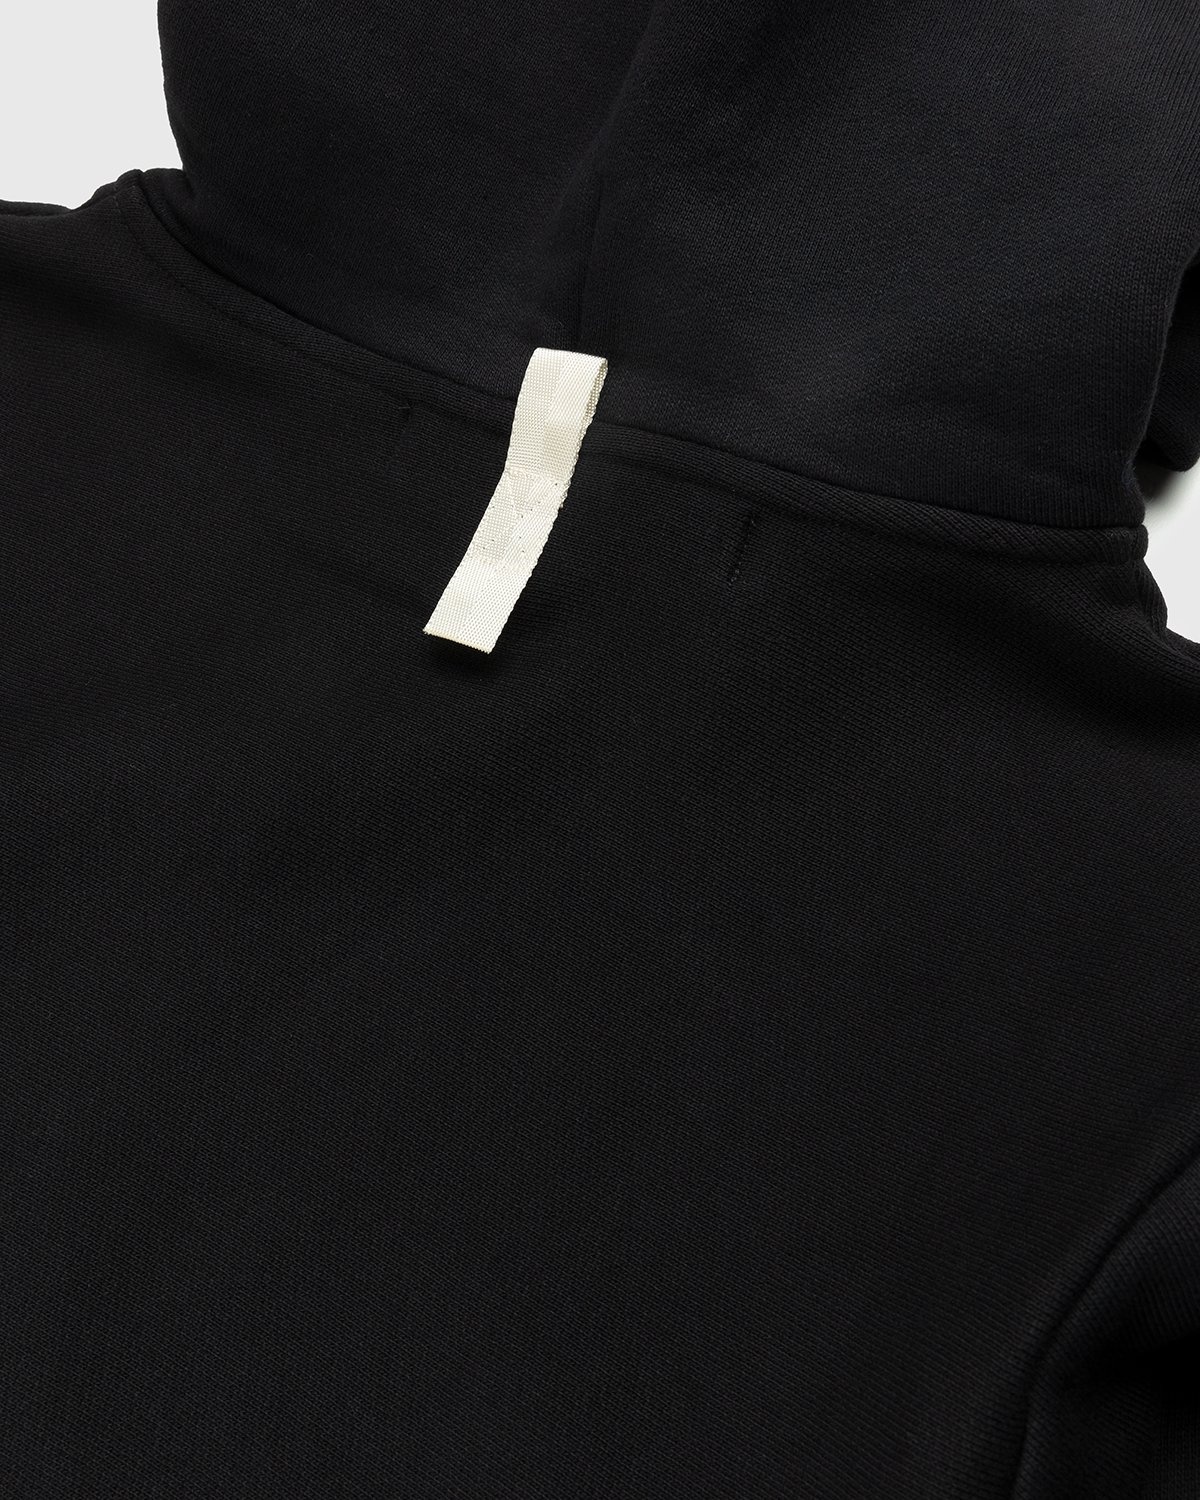 Abc. – Zip-Up French Terry Hoodie Anthracite - Zip-Up Sweats - Black - Image 4